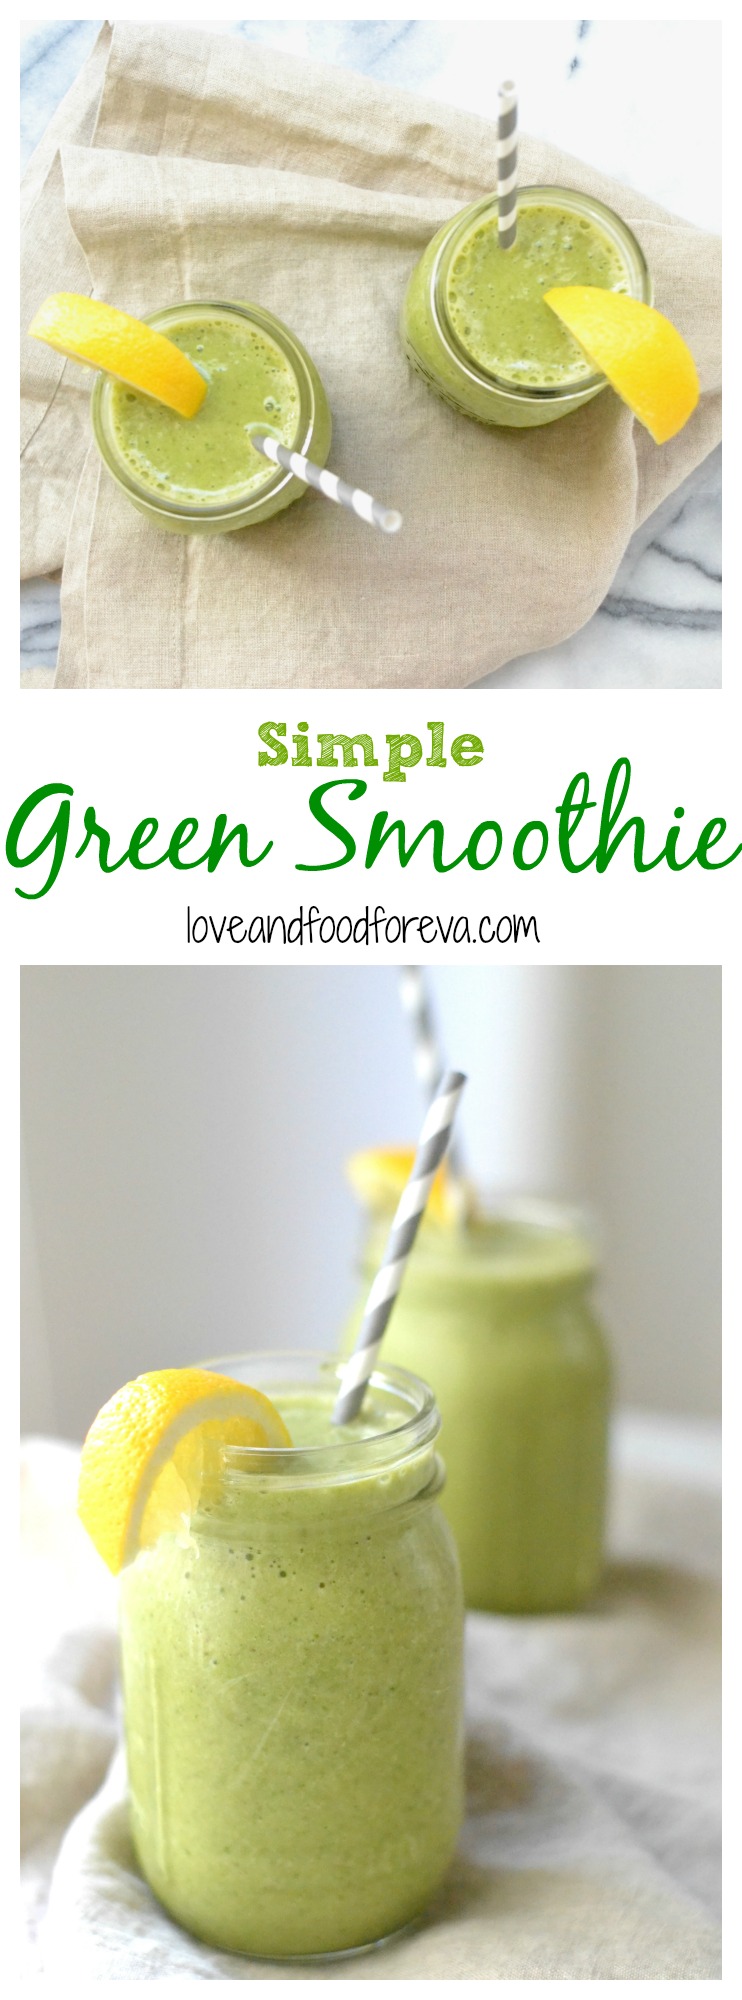 Simple Green Smoothie - so easy to customize it to your liking!